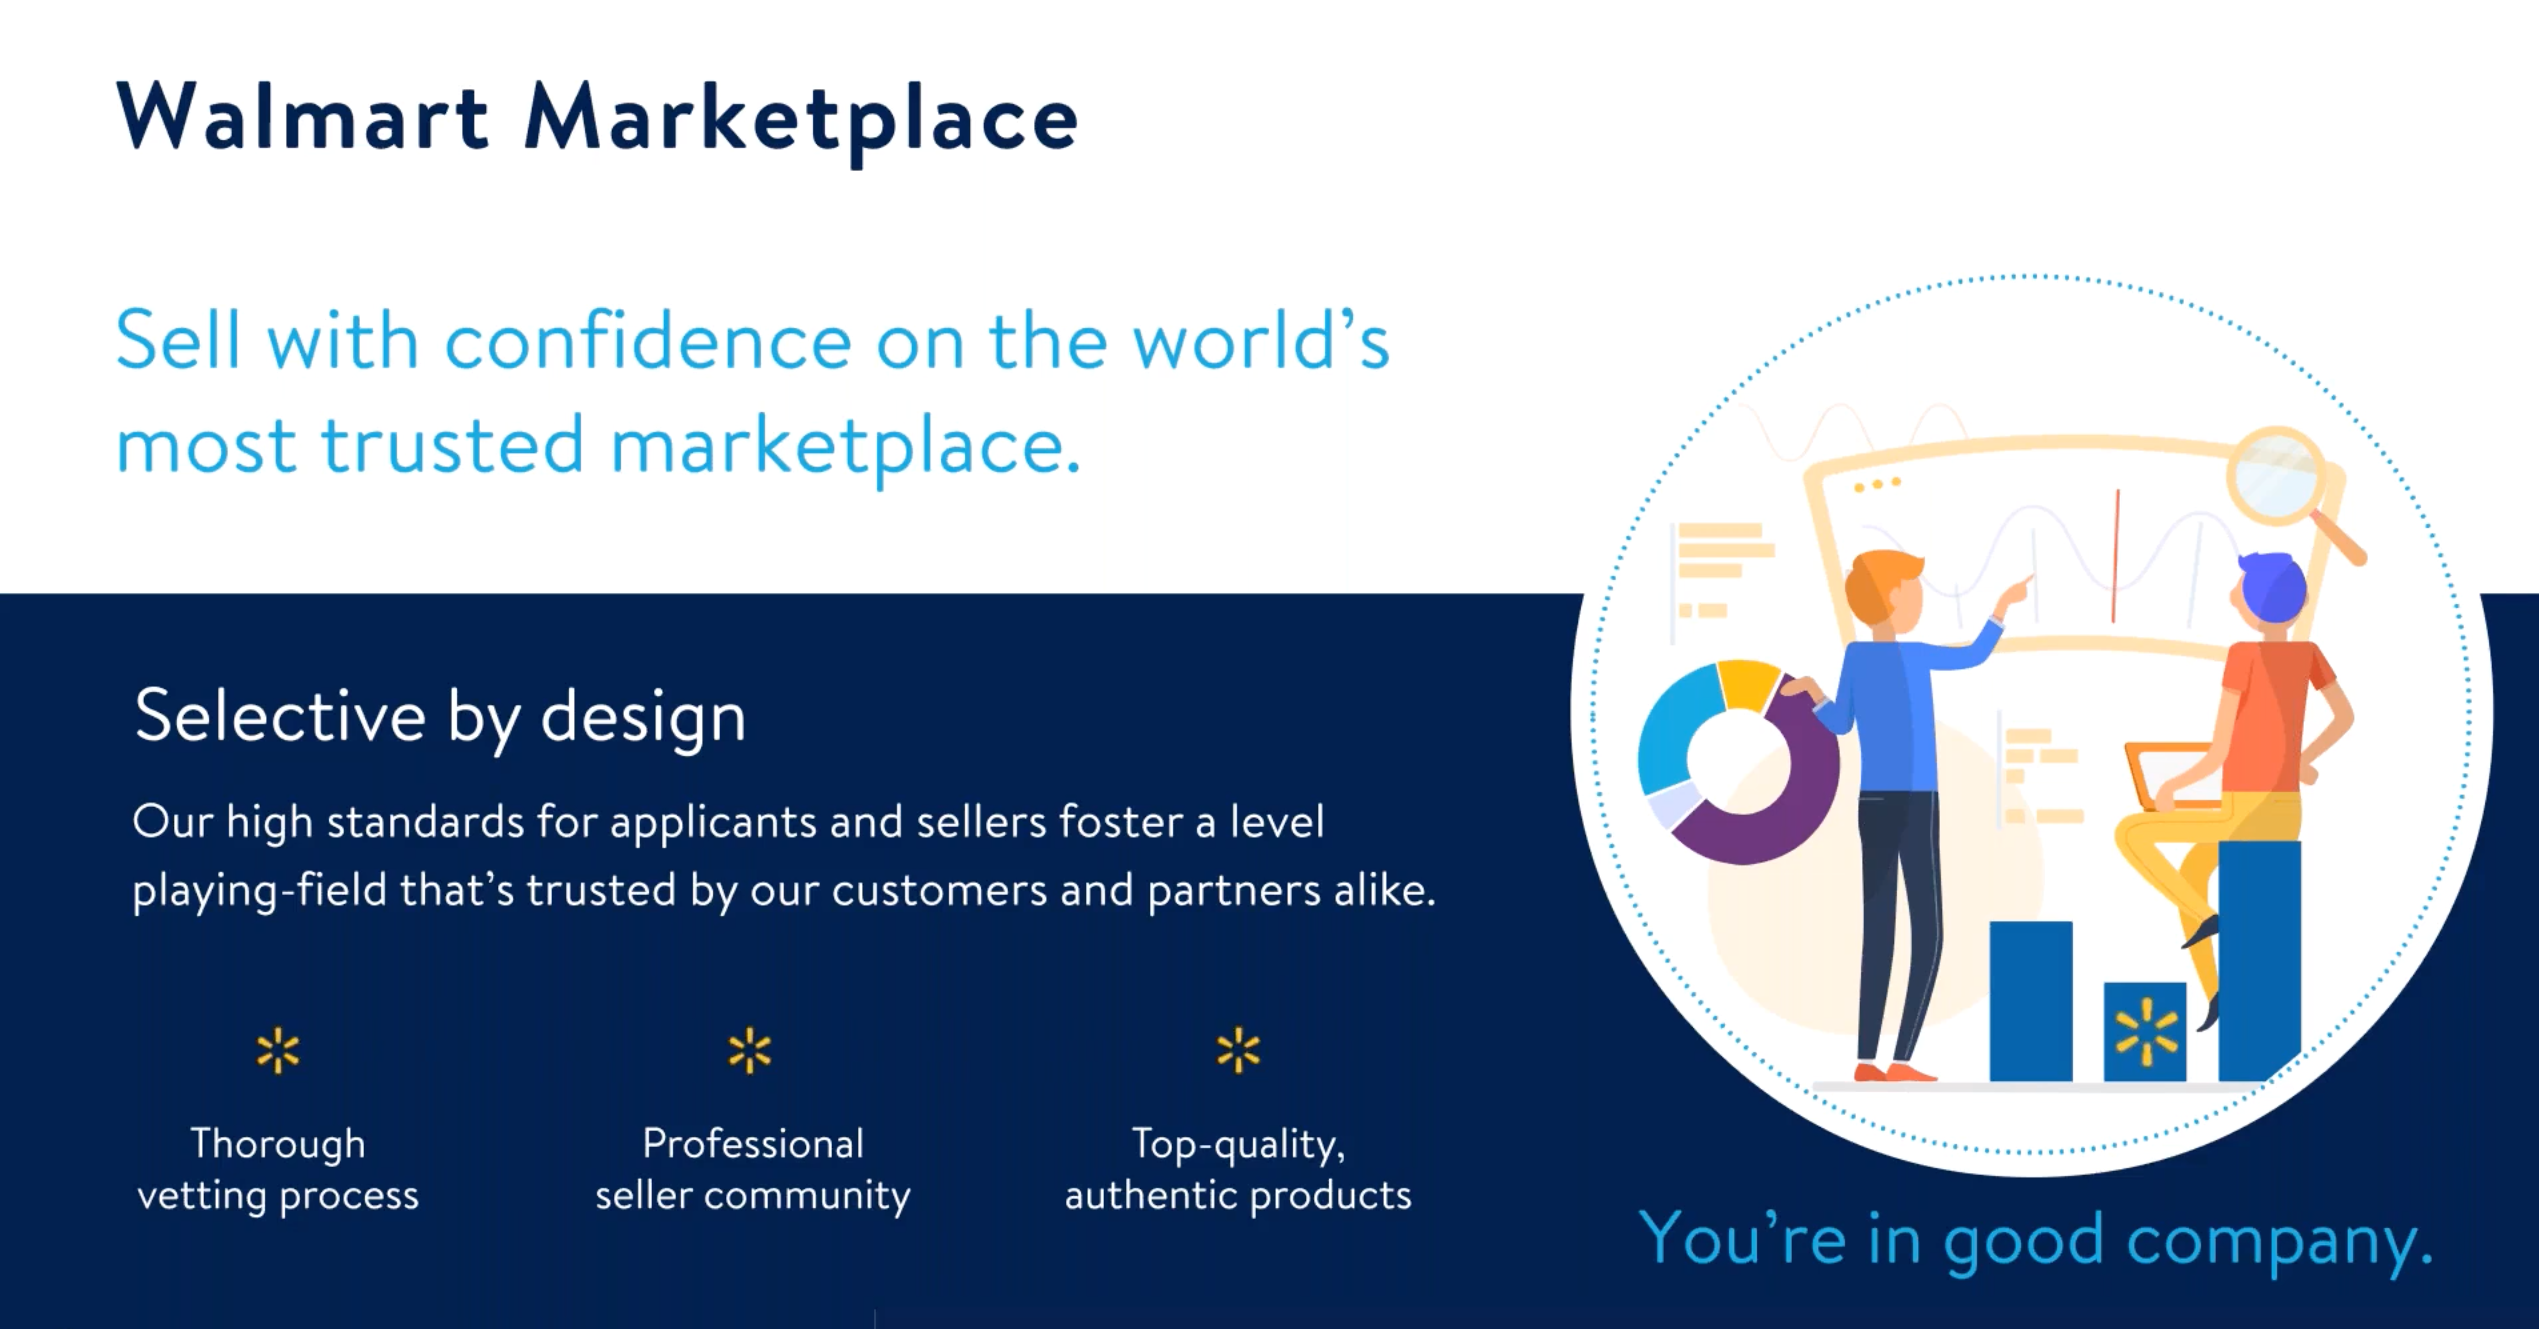 Walmart Marketplace is selective by design